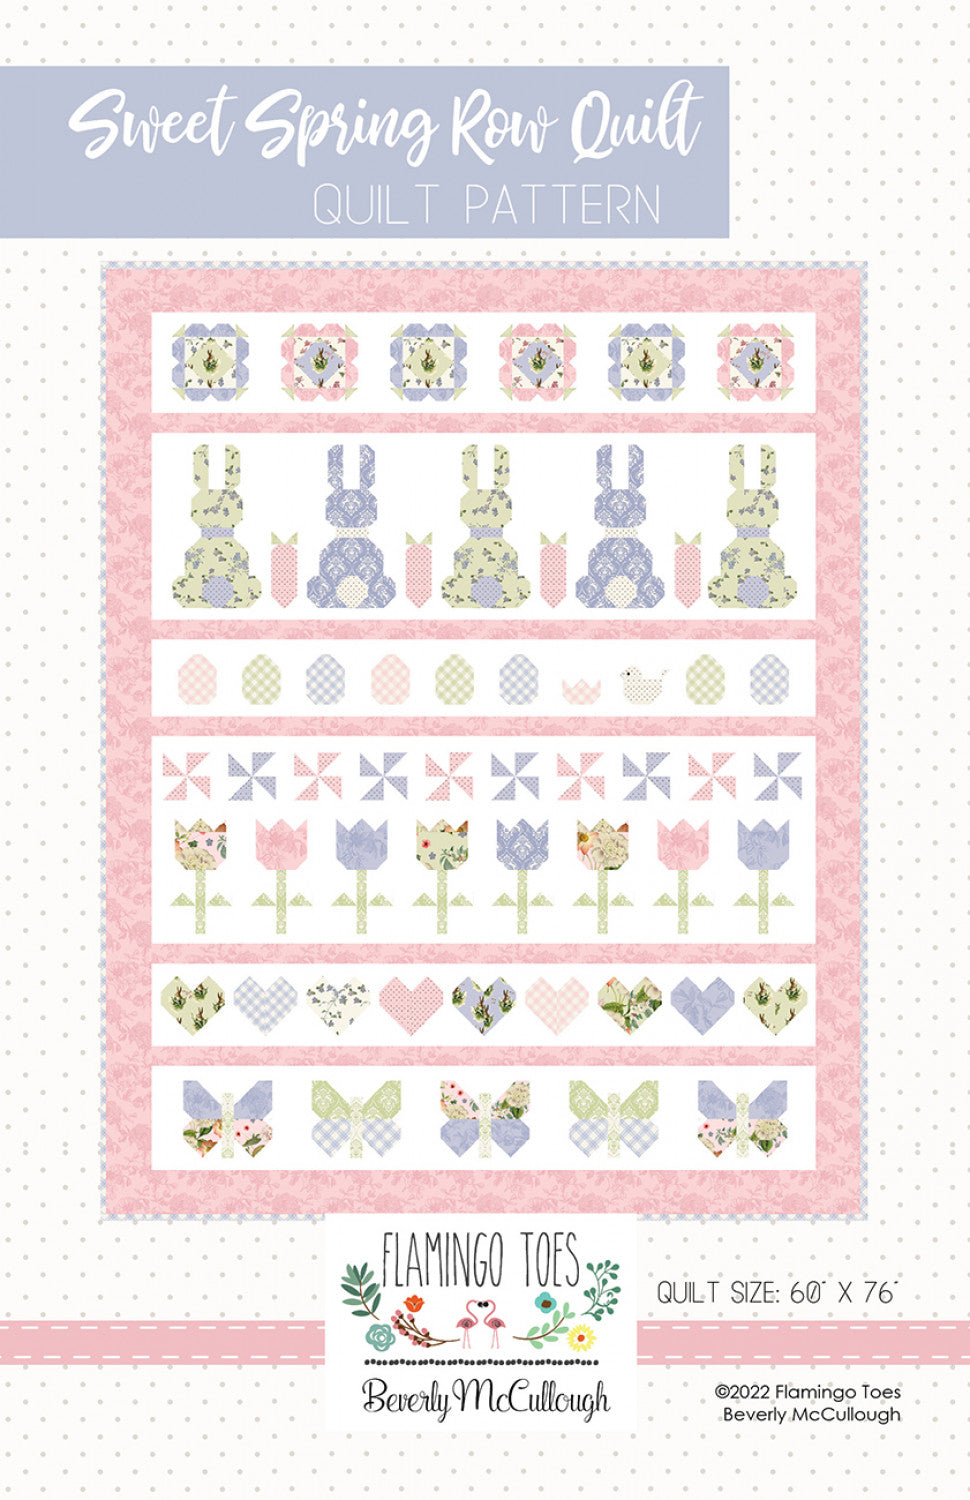 Sweet Spring Row Quilt Pattern by Flamingo Toes